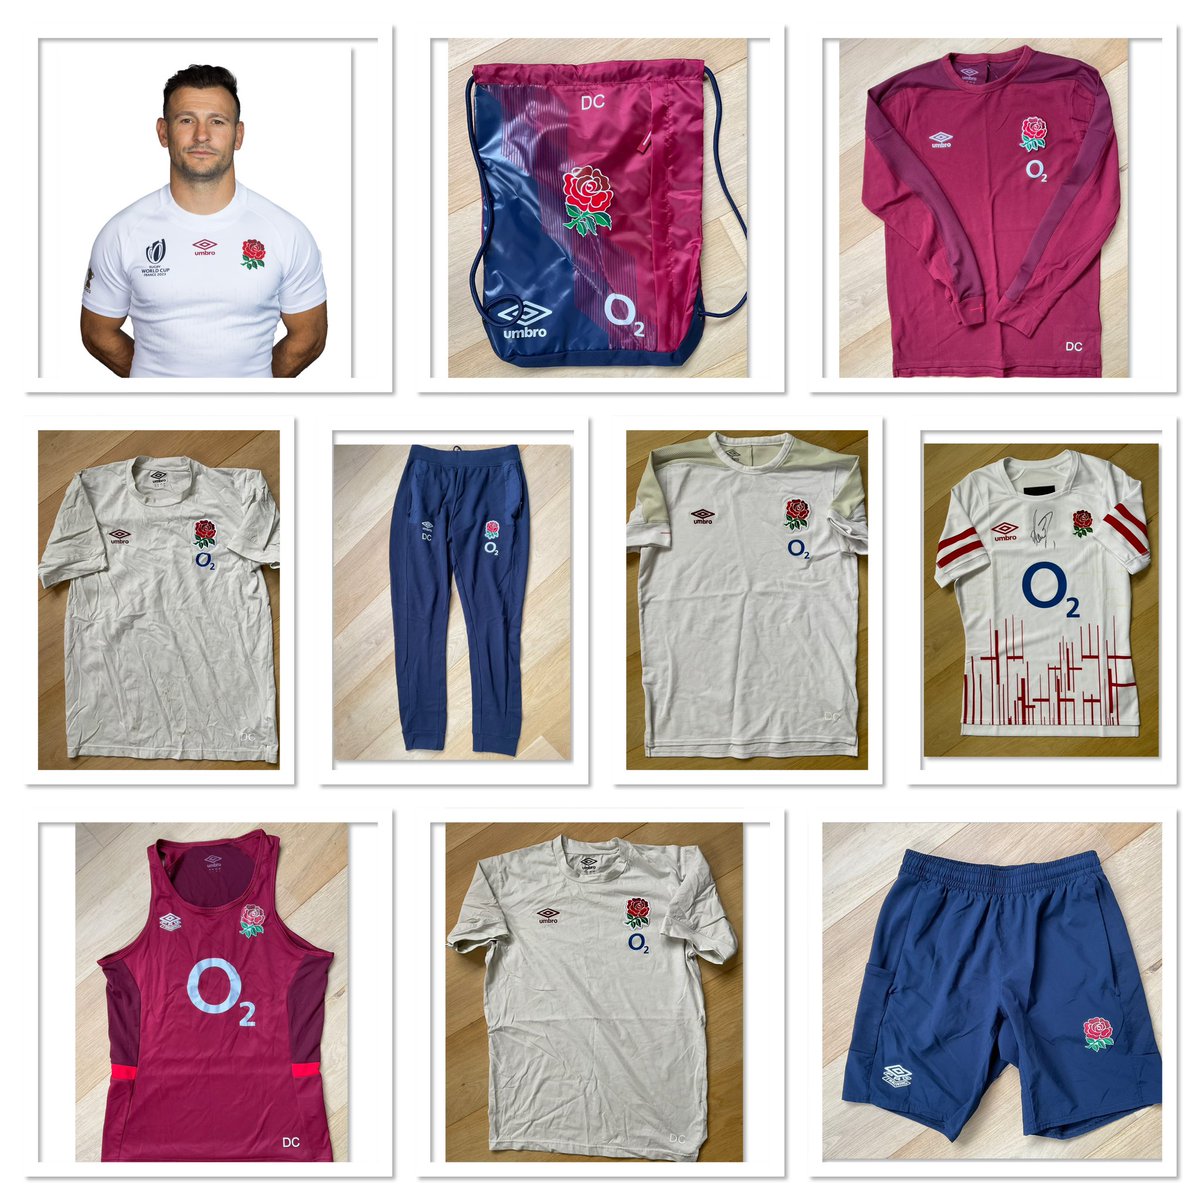 We have just collected some of @dannycare last items of @EnglandRugby kit. Check it out here inmylocker.co.uk/collections/da…